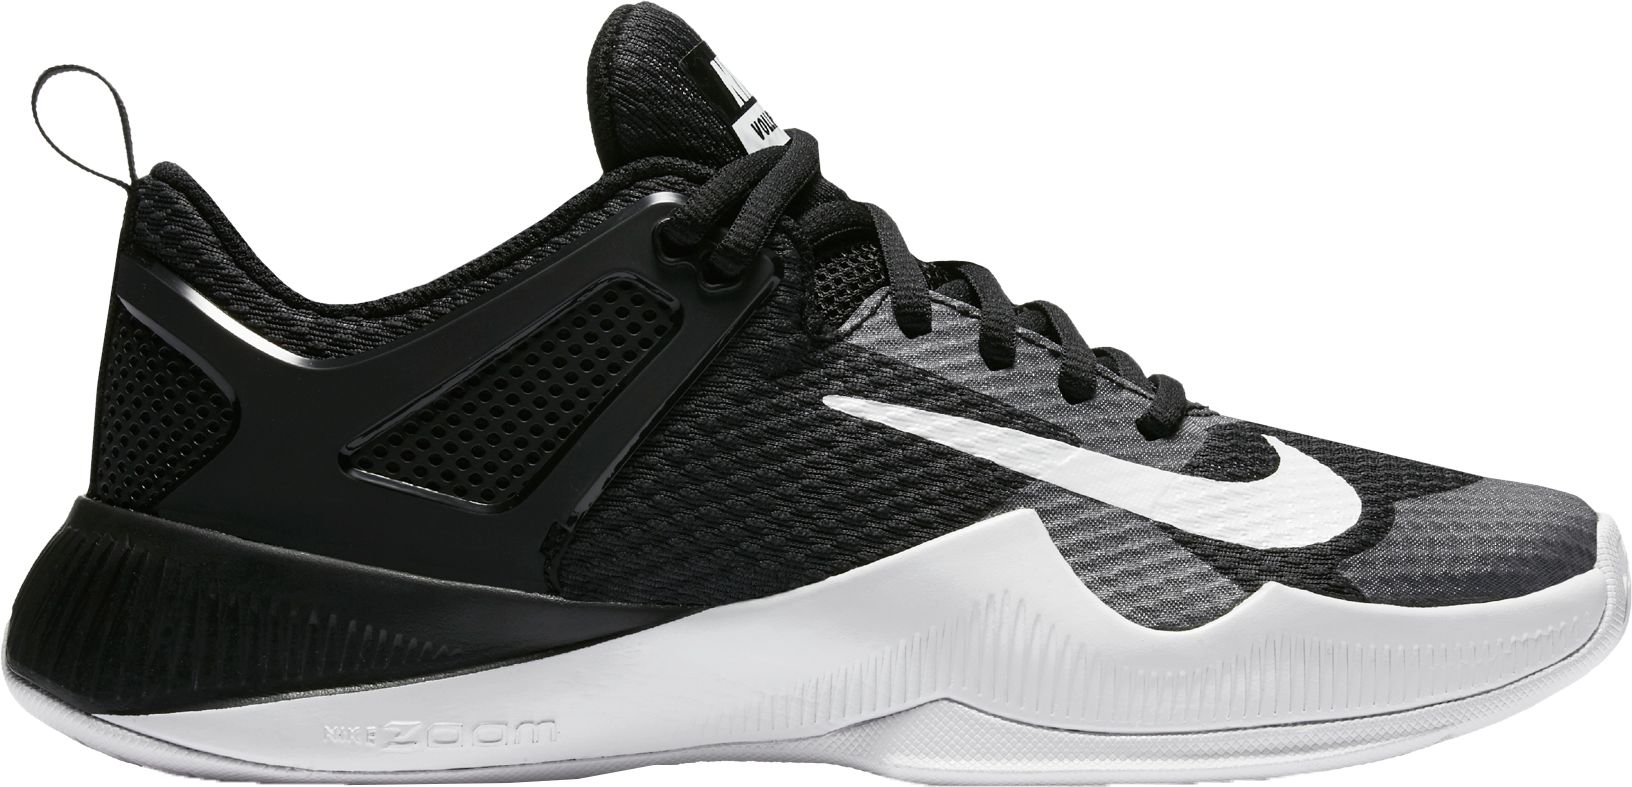 nike volleyball men's shoes hyperspike